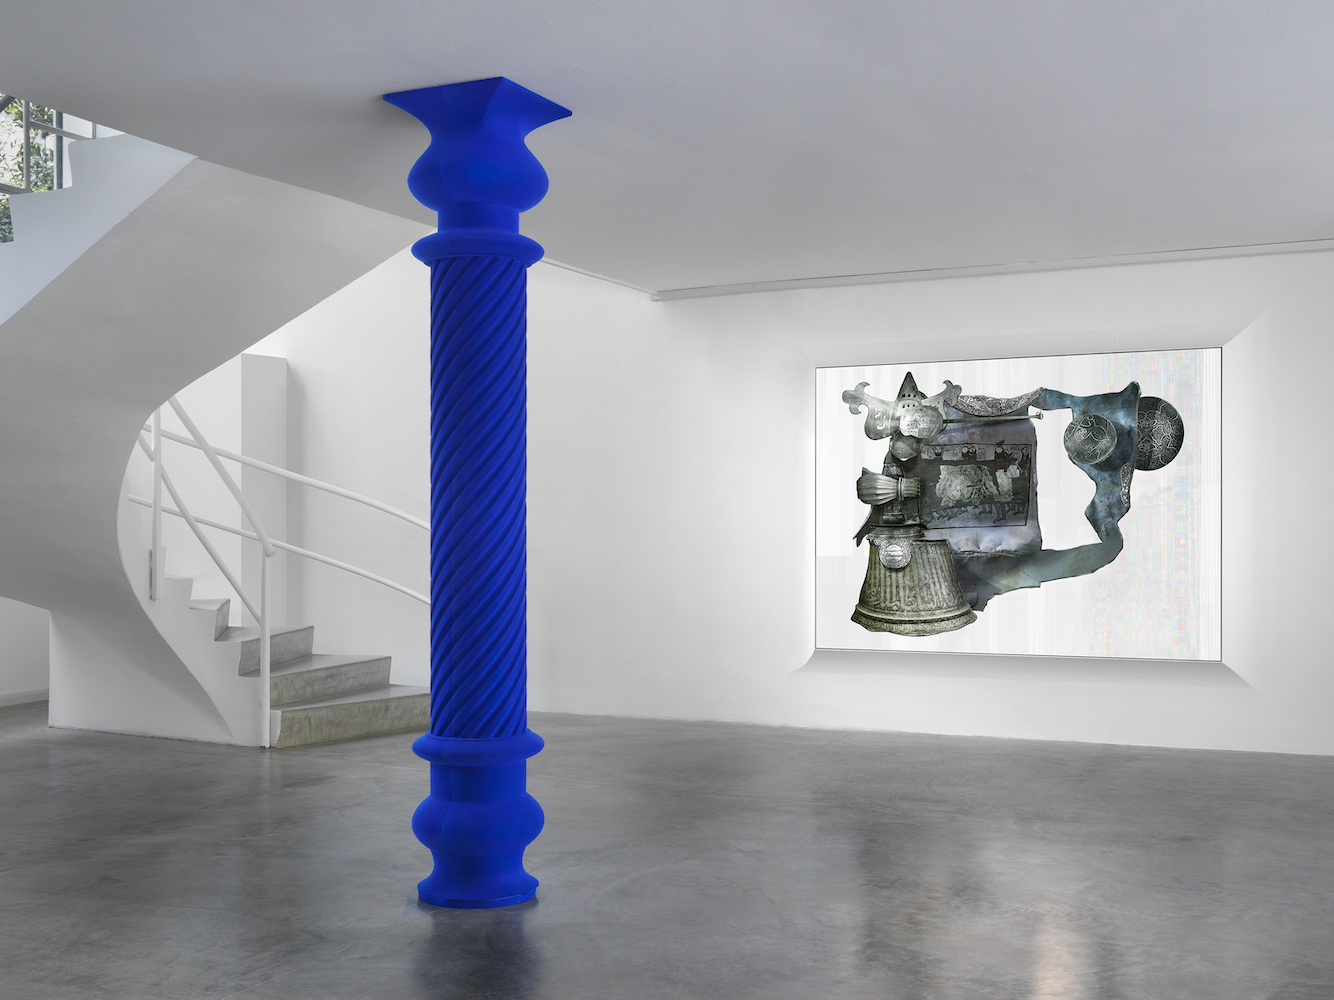 Installation view of Ilit Azoulay's 